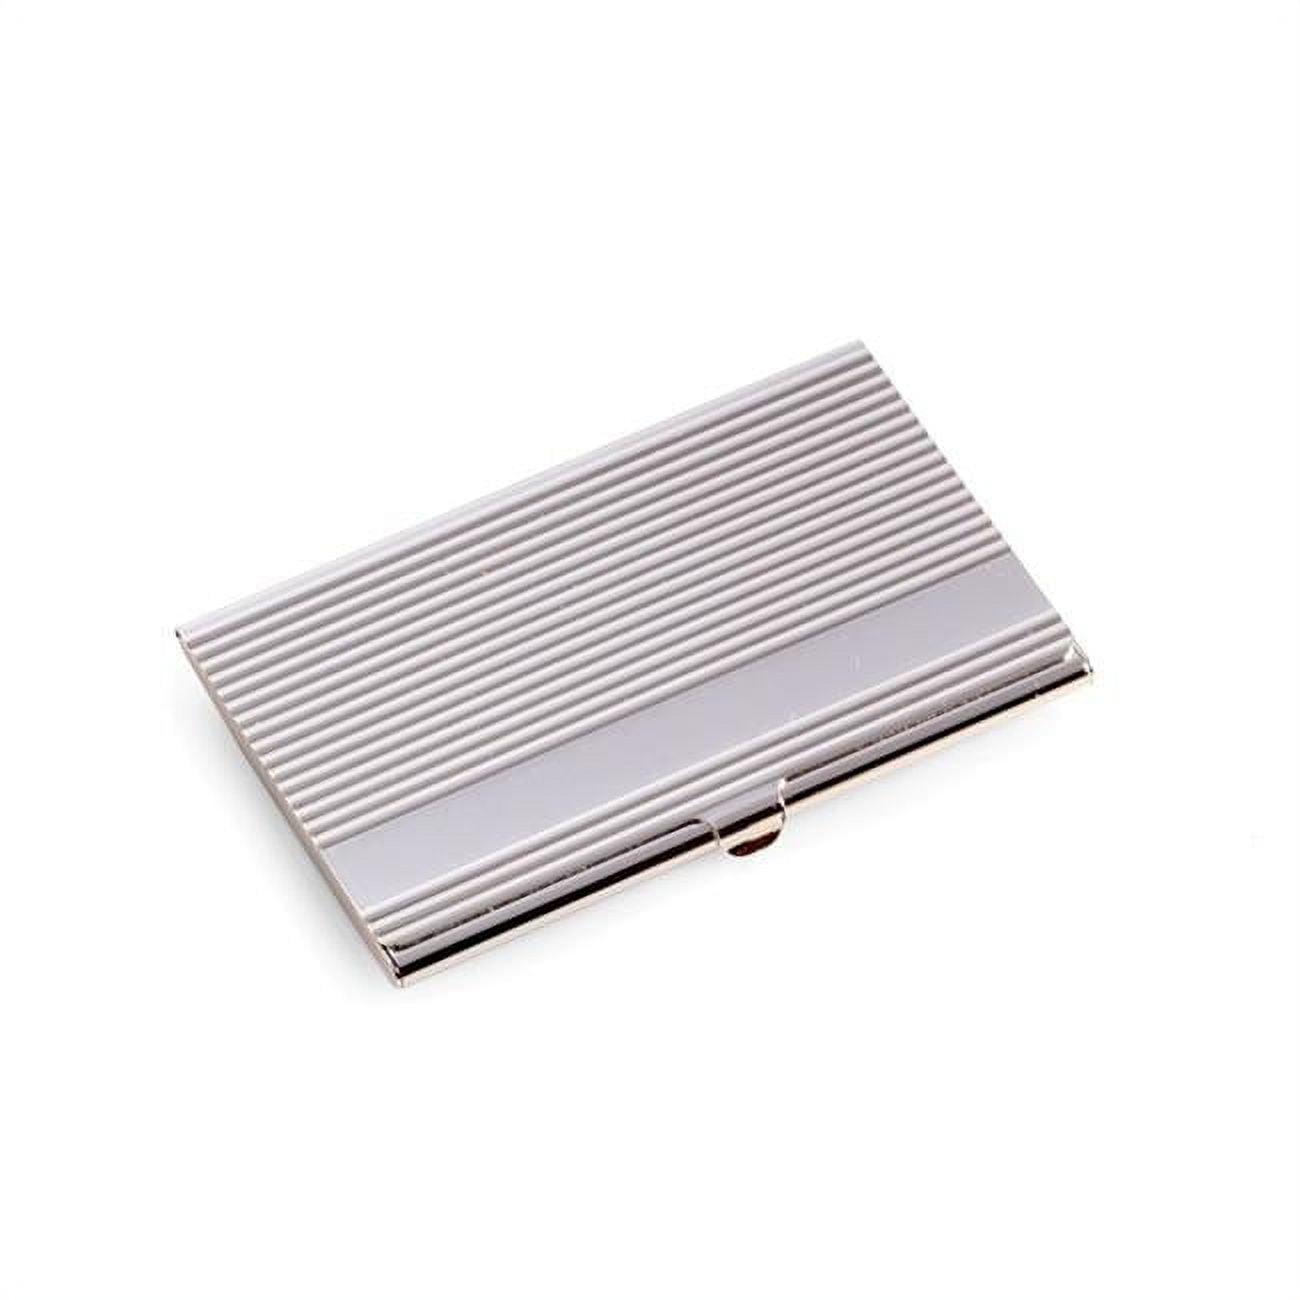 Picture of Bey-Berk International D261 Silver Plated Business Card Case with Lined Design 